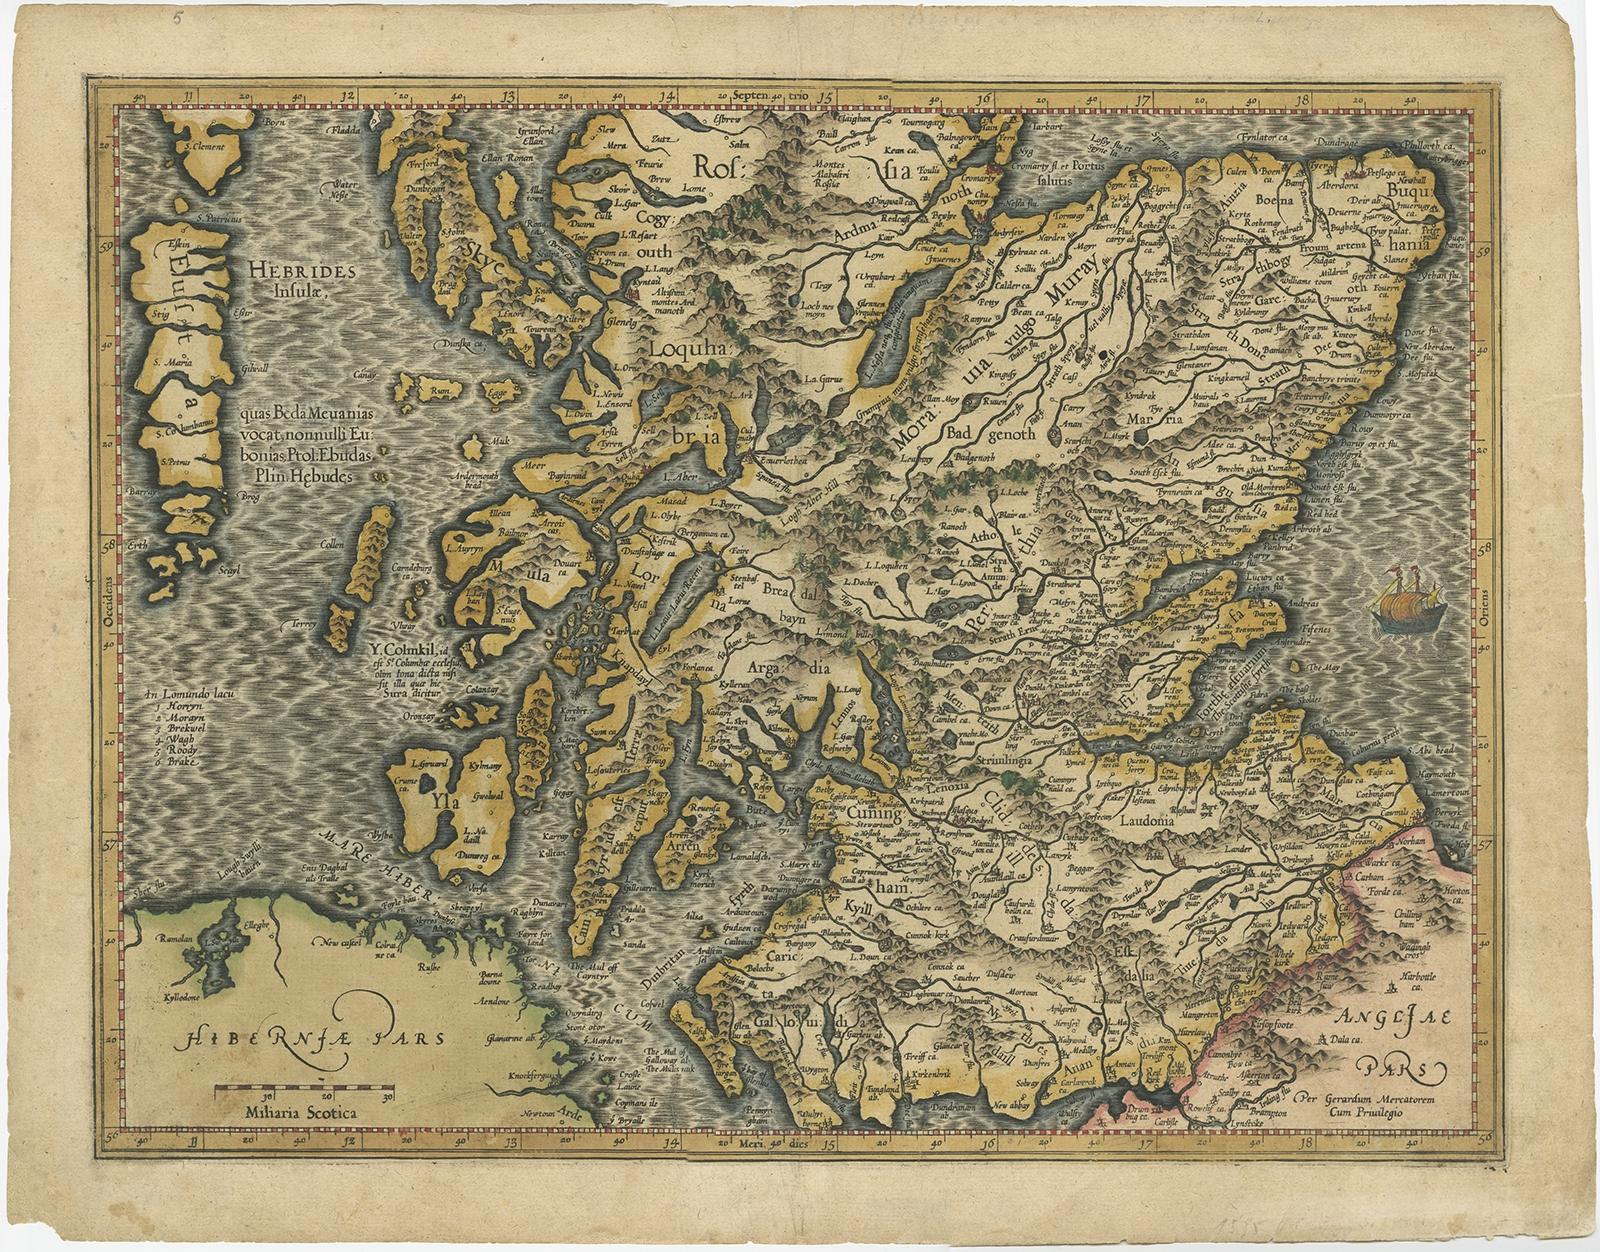 Antique map of Southern Scotland. This map was published by G. Mercator, he also published a map of Northern Scotland titled 'Scotiae Regnum'. Both maps were published on individual sheets. 

Artists and Engravers: Gerard Mercator (1512 - 1594)